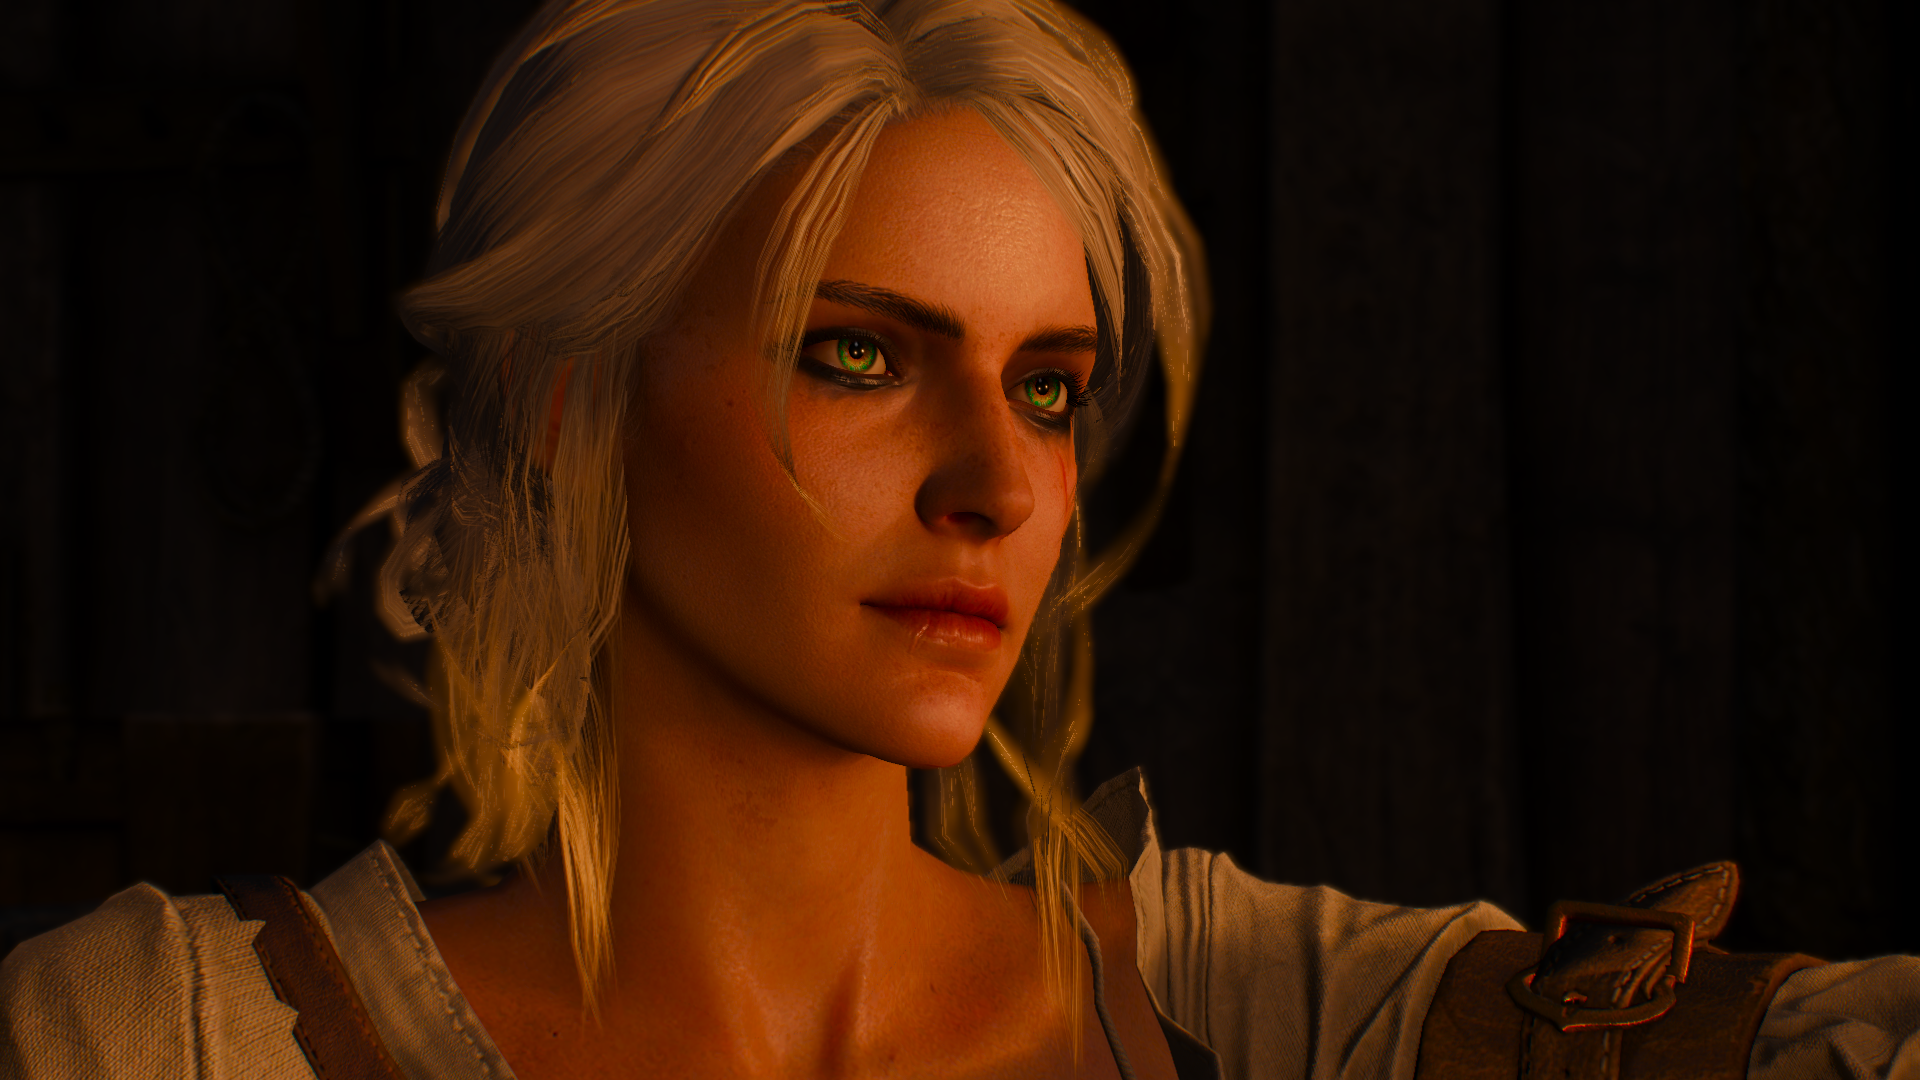 General 1920x1080 The Witcher 3: Wild Hunt Cirilla Fiona Elen Riannon screen shot RPG video games PC gaming video game girls video game characters